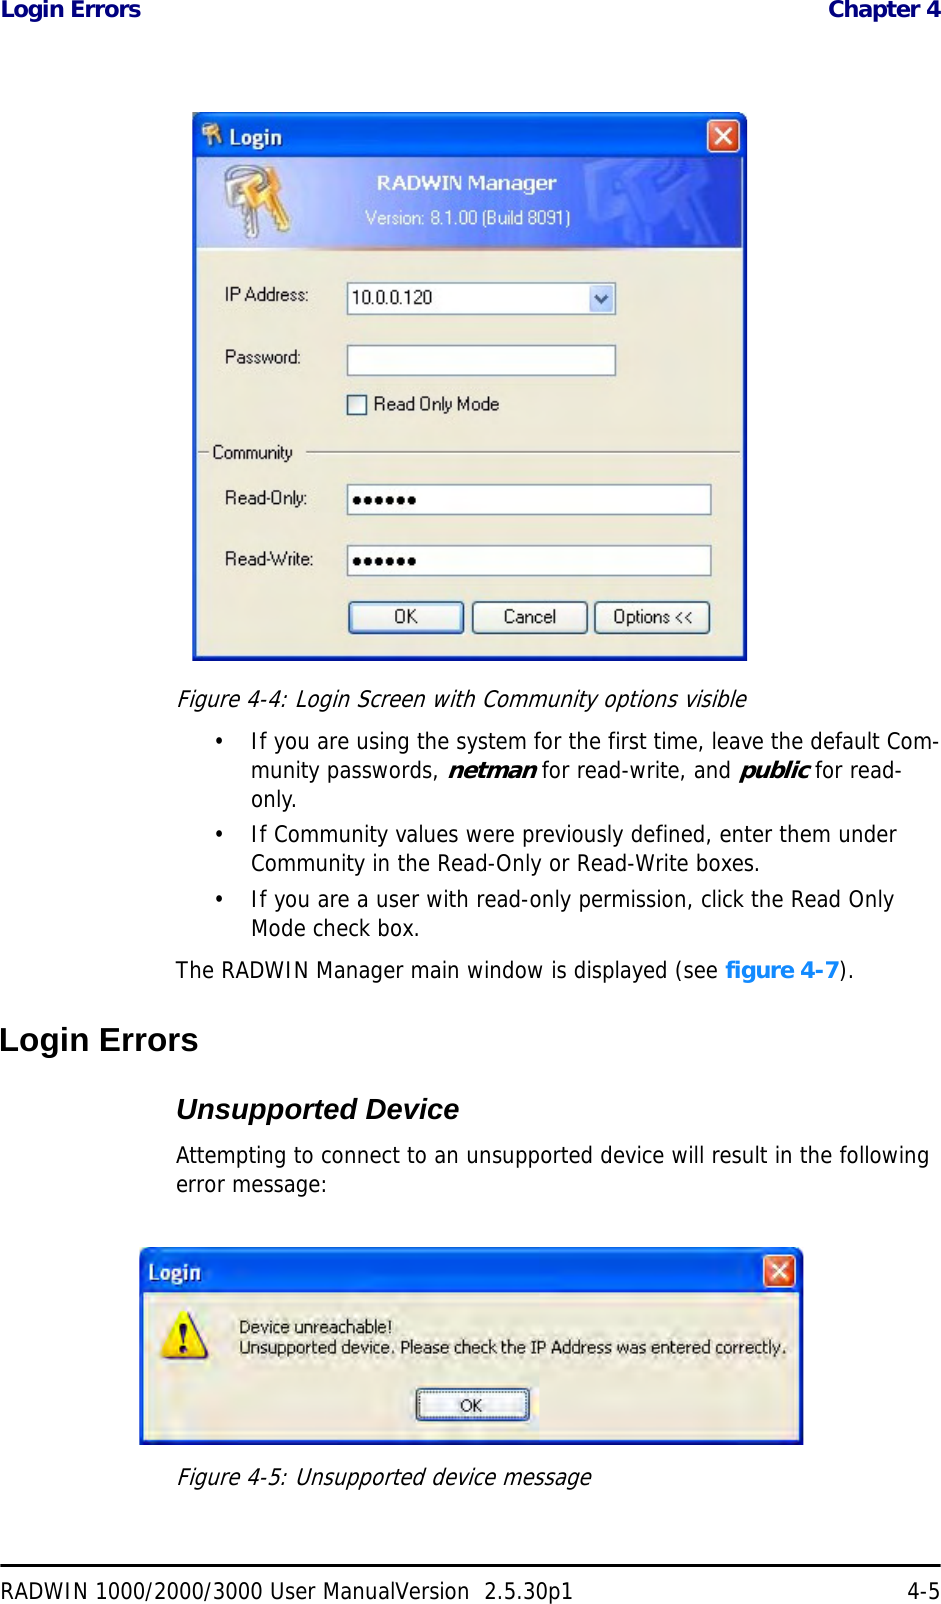 Login Errors  Chapter 4RADWIN 1000/2000/3000 User ManualVersion  2.5.30p1 4-5Figure 4-4: Login Screen with Community options visible• If you are using the system for the first time, leave the default Com-munity passwords, netman for read-write, and public for read-only.• If Community values were previously defined, enter them under Community in the Read-Only or Read-Write boxes.• If you are a user with read-only permission, click the Read Only Mode check box.The RADWIN Manager main window is displayed (see figure 4-7).Login ErrorsUnsupported DeviceAttempting to connect to an unsupported device will result in the following error message:Figure 4-5: Unsupported device message